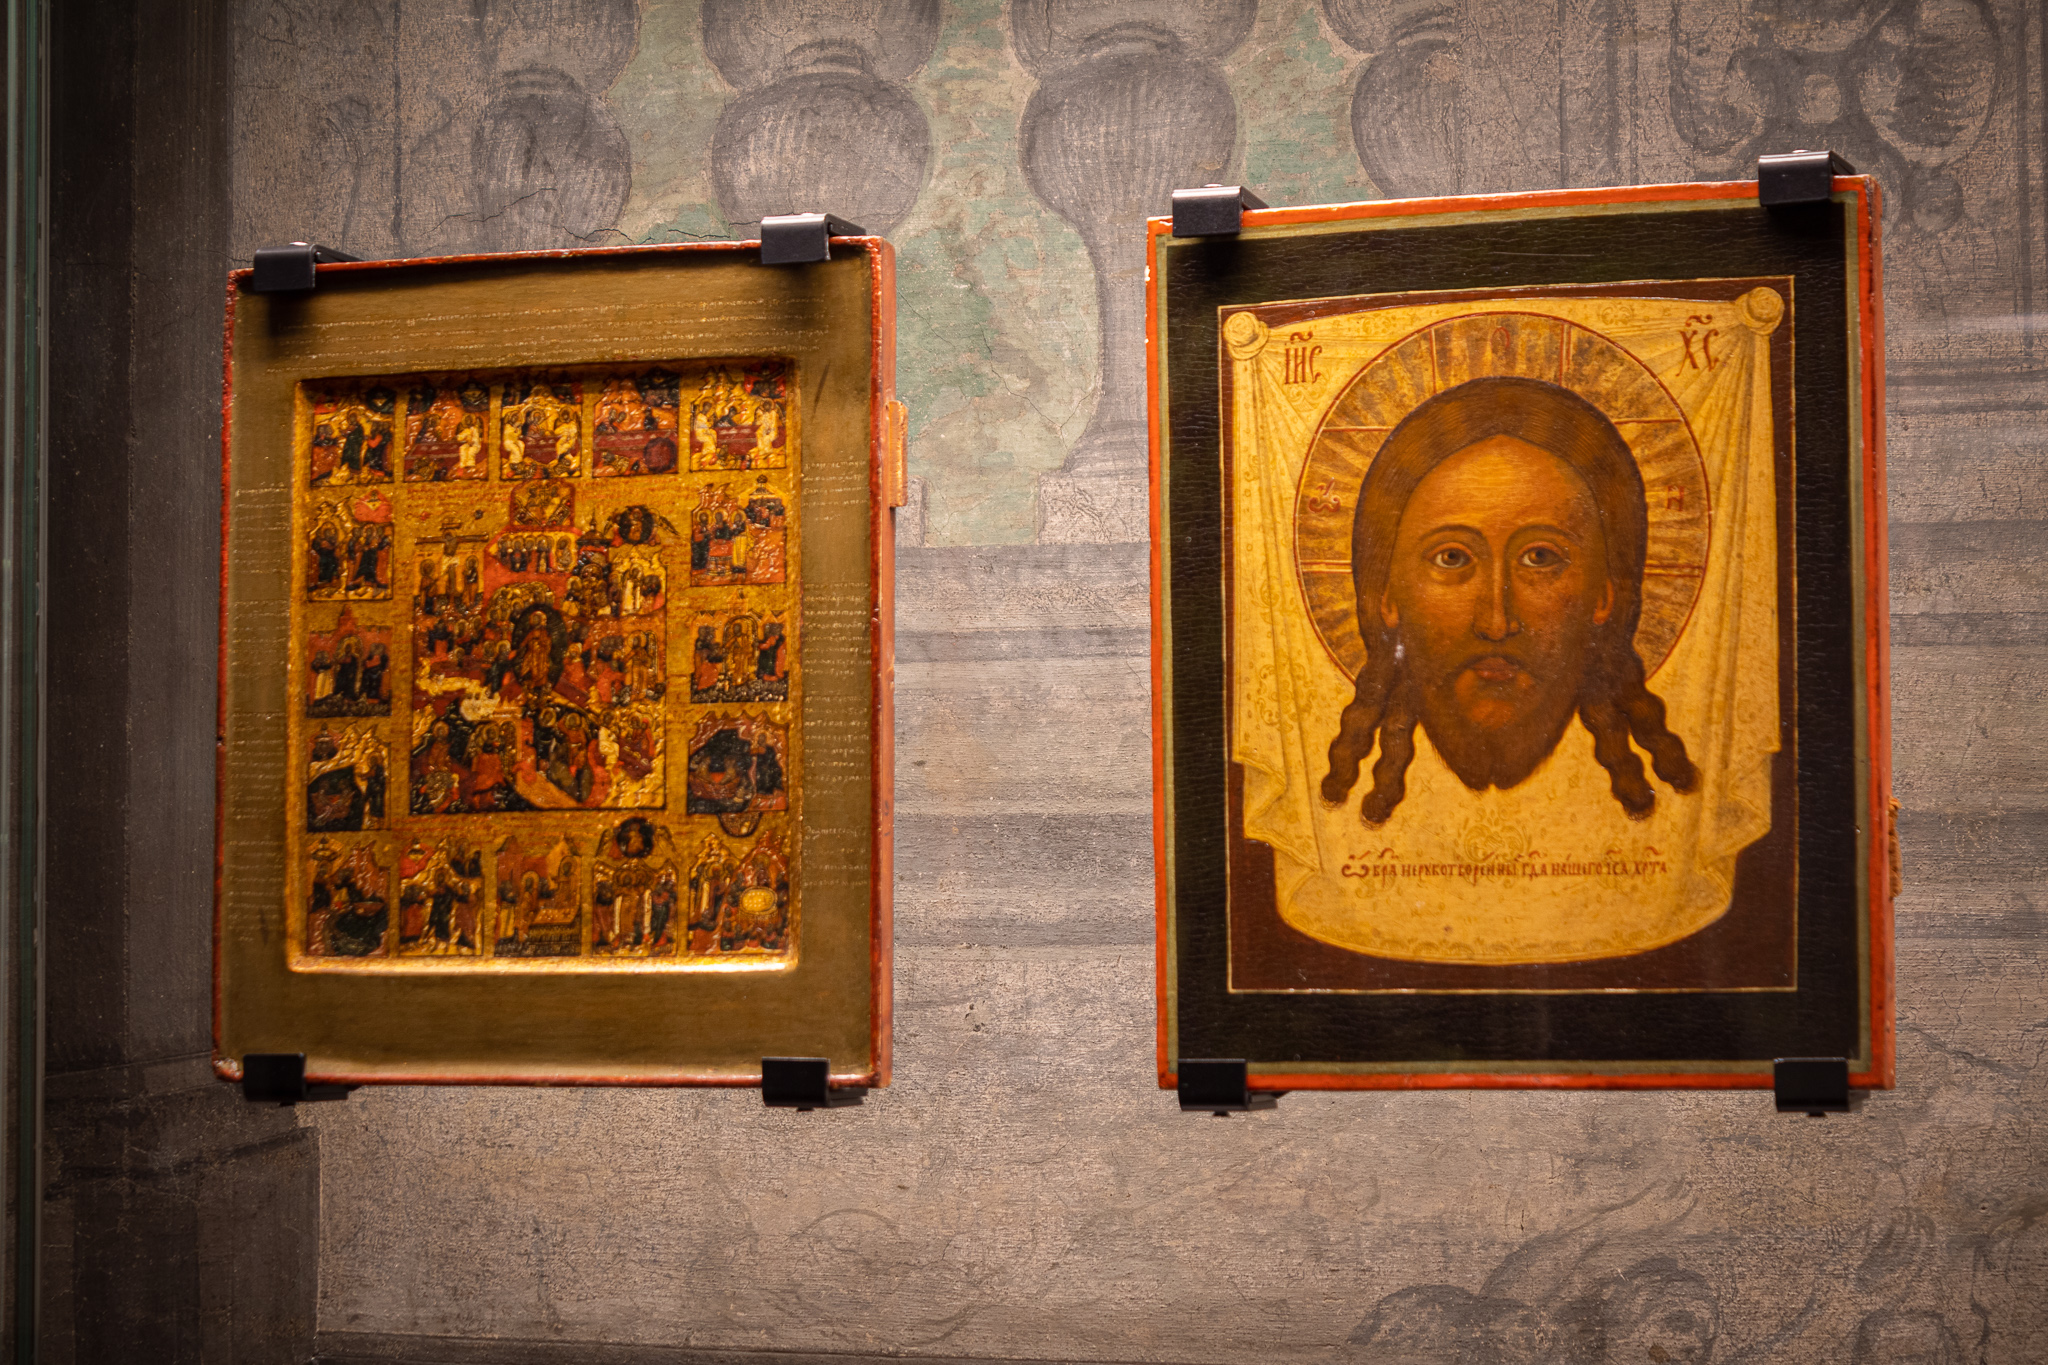 Palatine Chapel and Museum of Russian icons